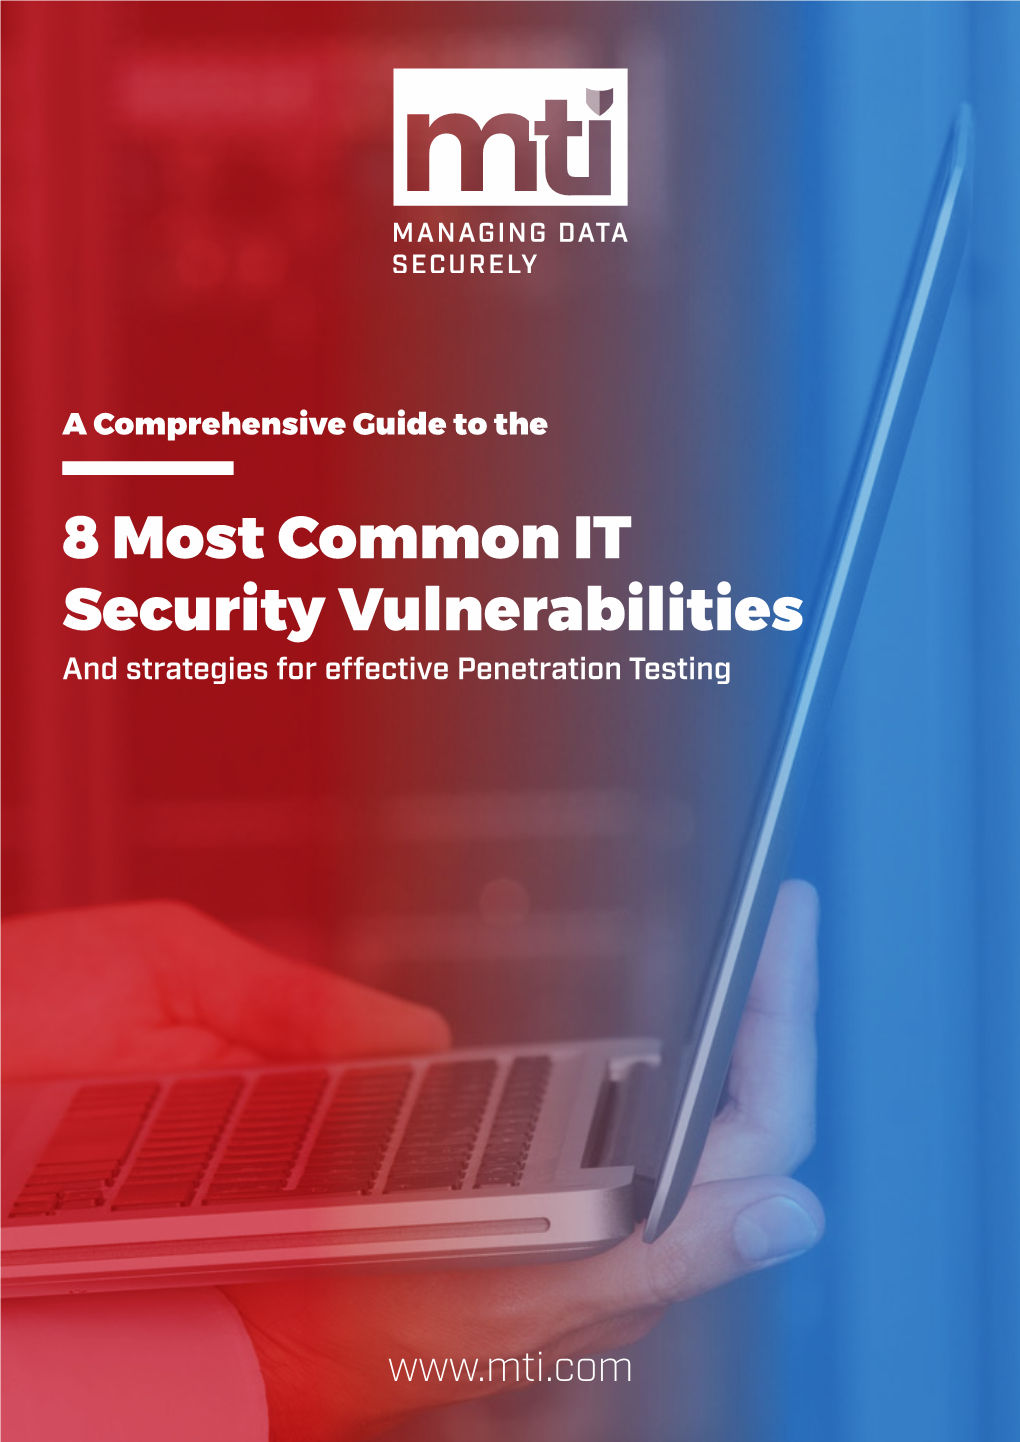 8 Most Common IT Security Vulnerabilities and Strategies for Effective Penetration Testing